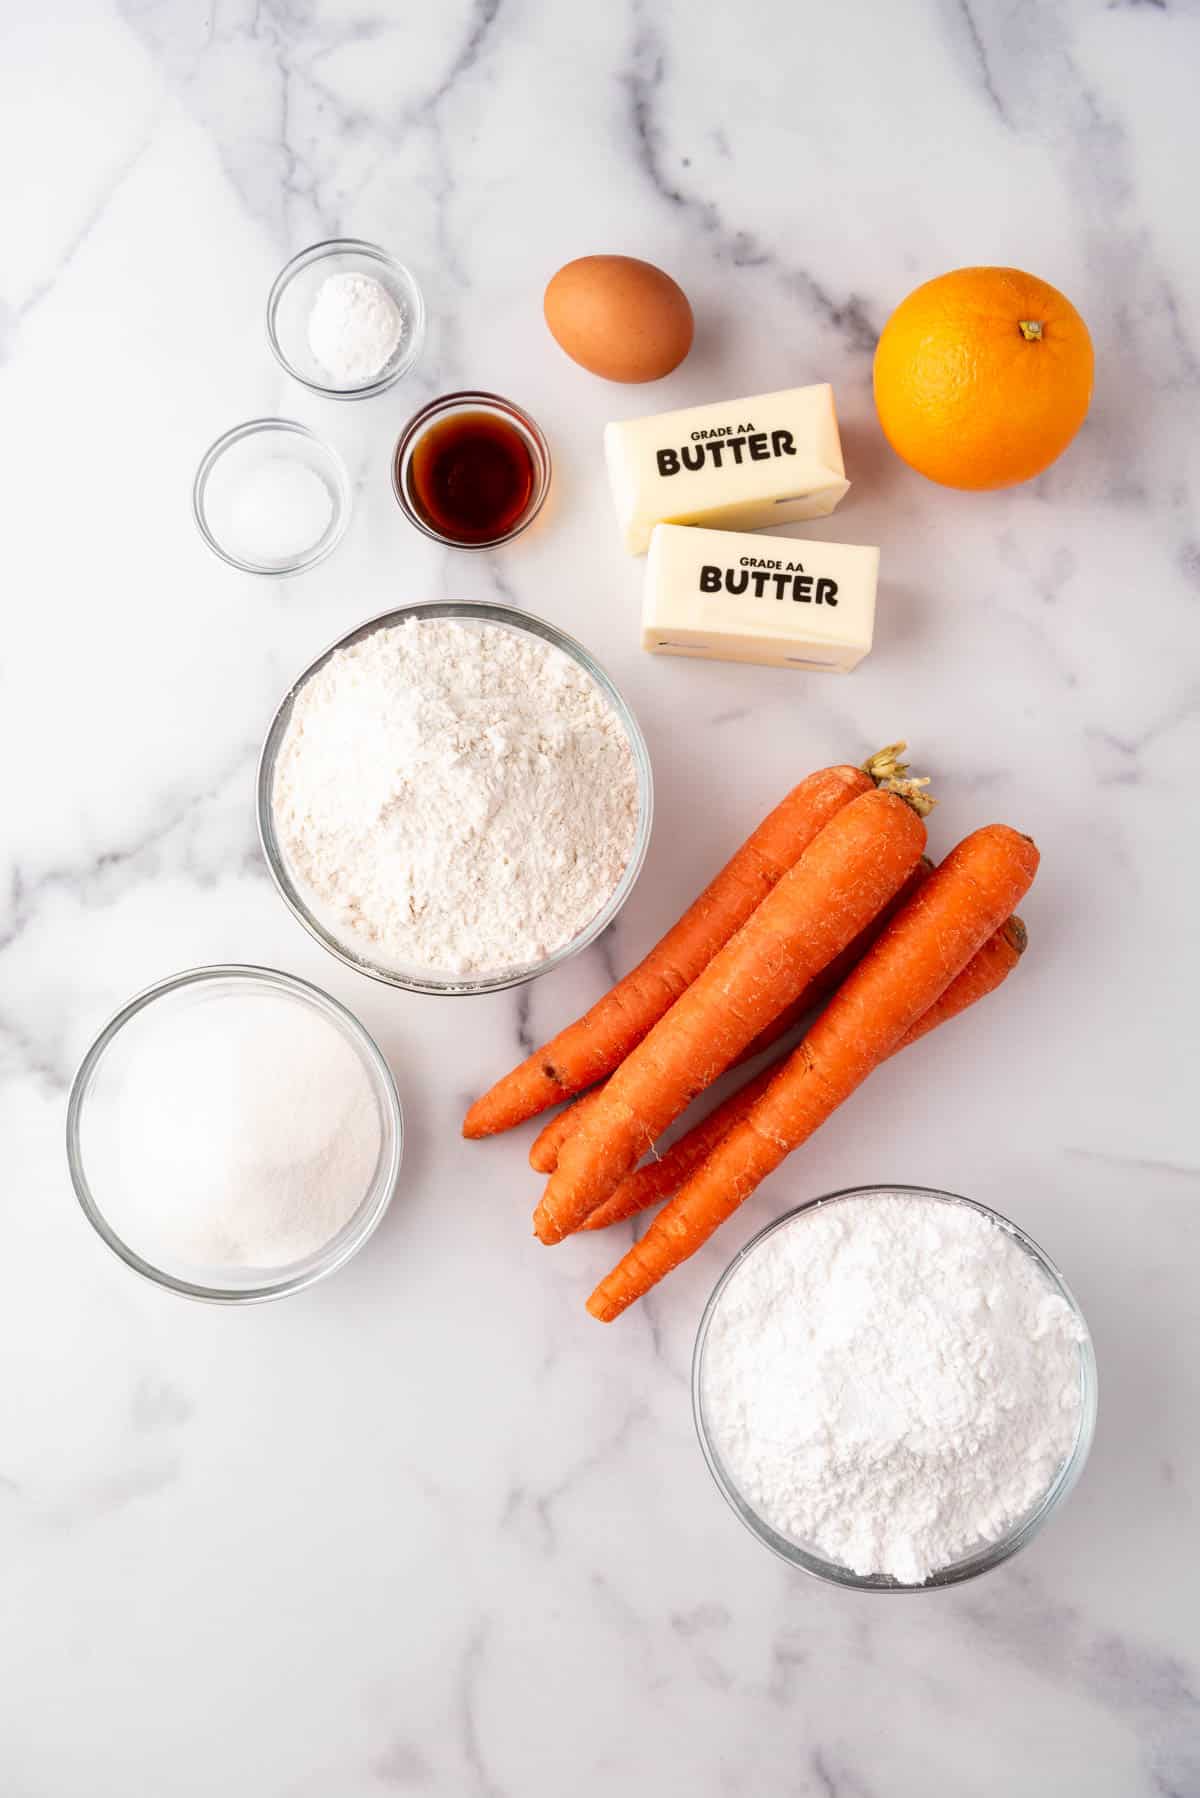 Ingredients for carrot cookies with orange glaze.